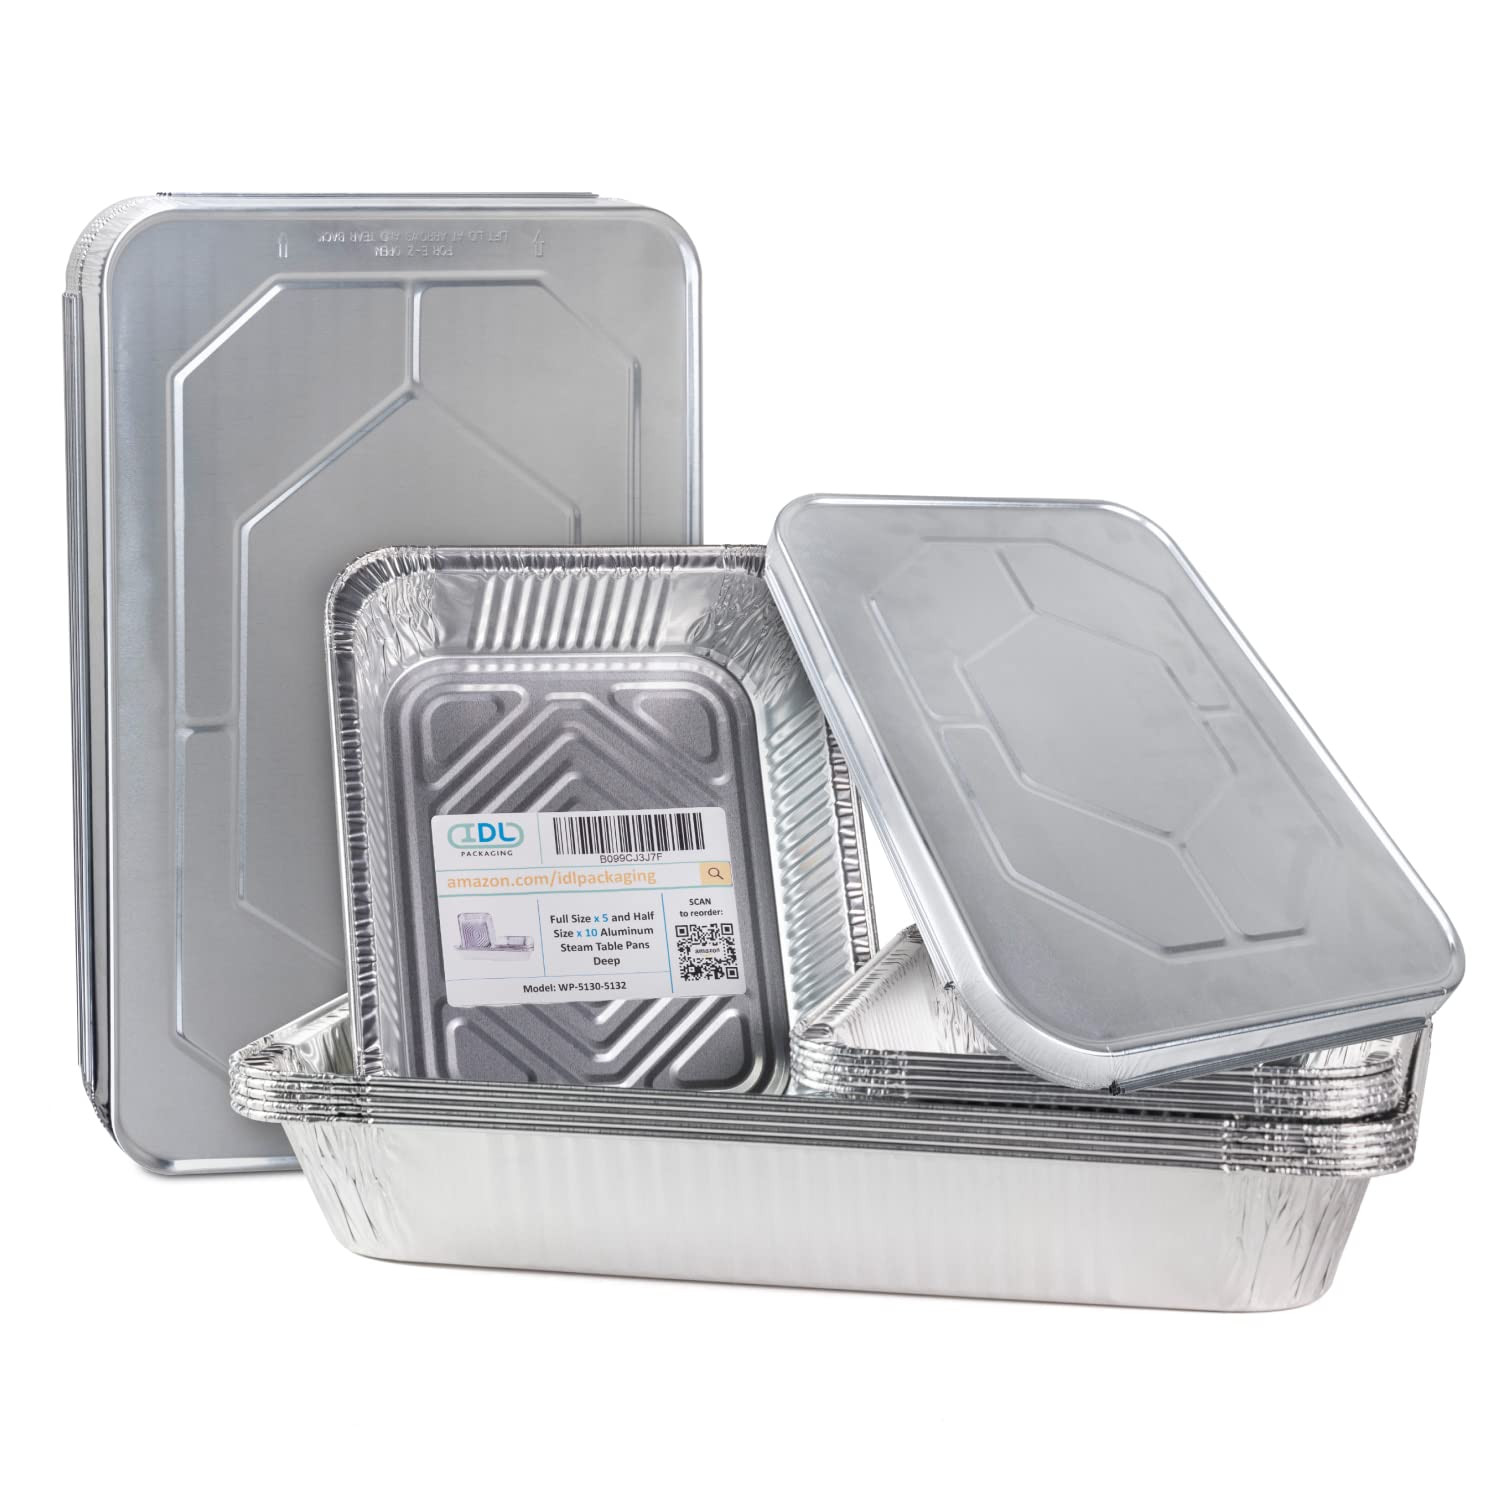 21 x 13 x 3 Full Size Aluminum Steam Table Pans with Lids, Deep buy in  stock in U.S. in IDL Packaging